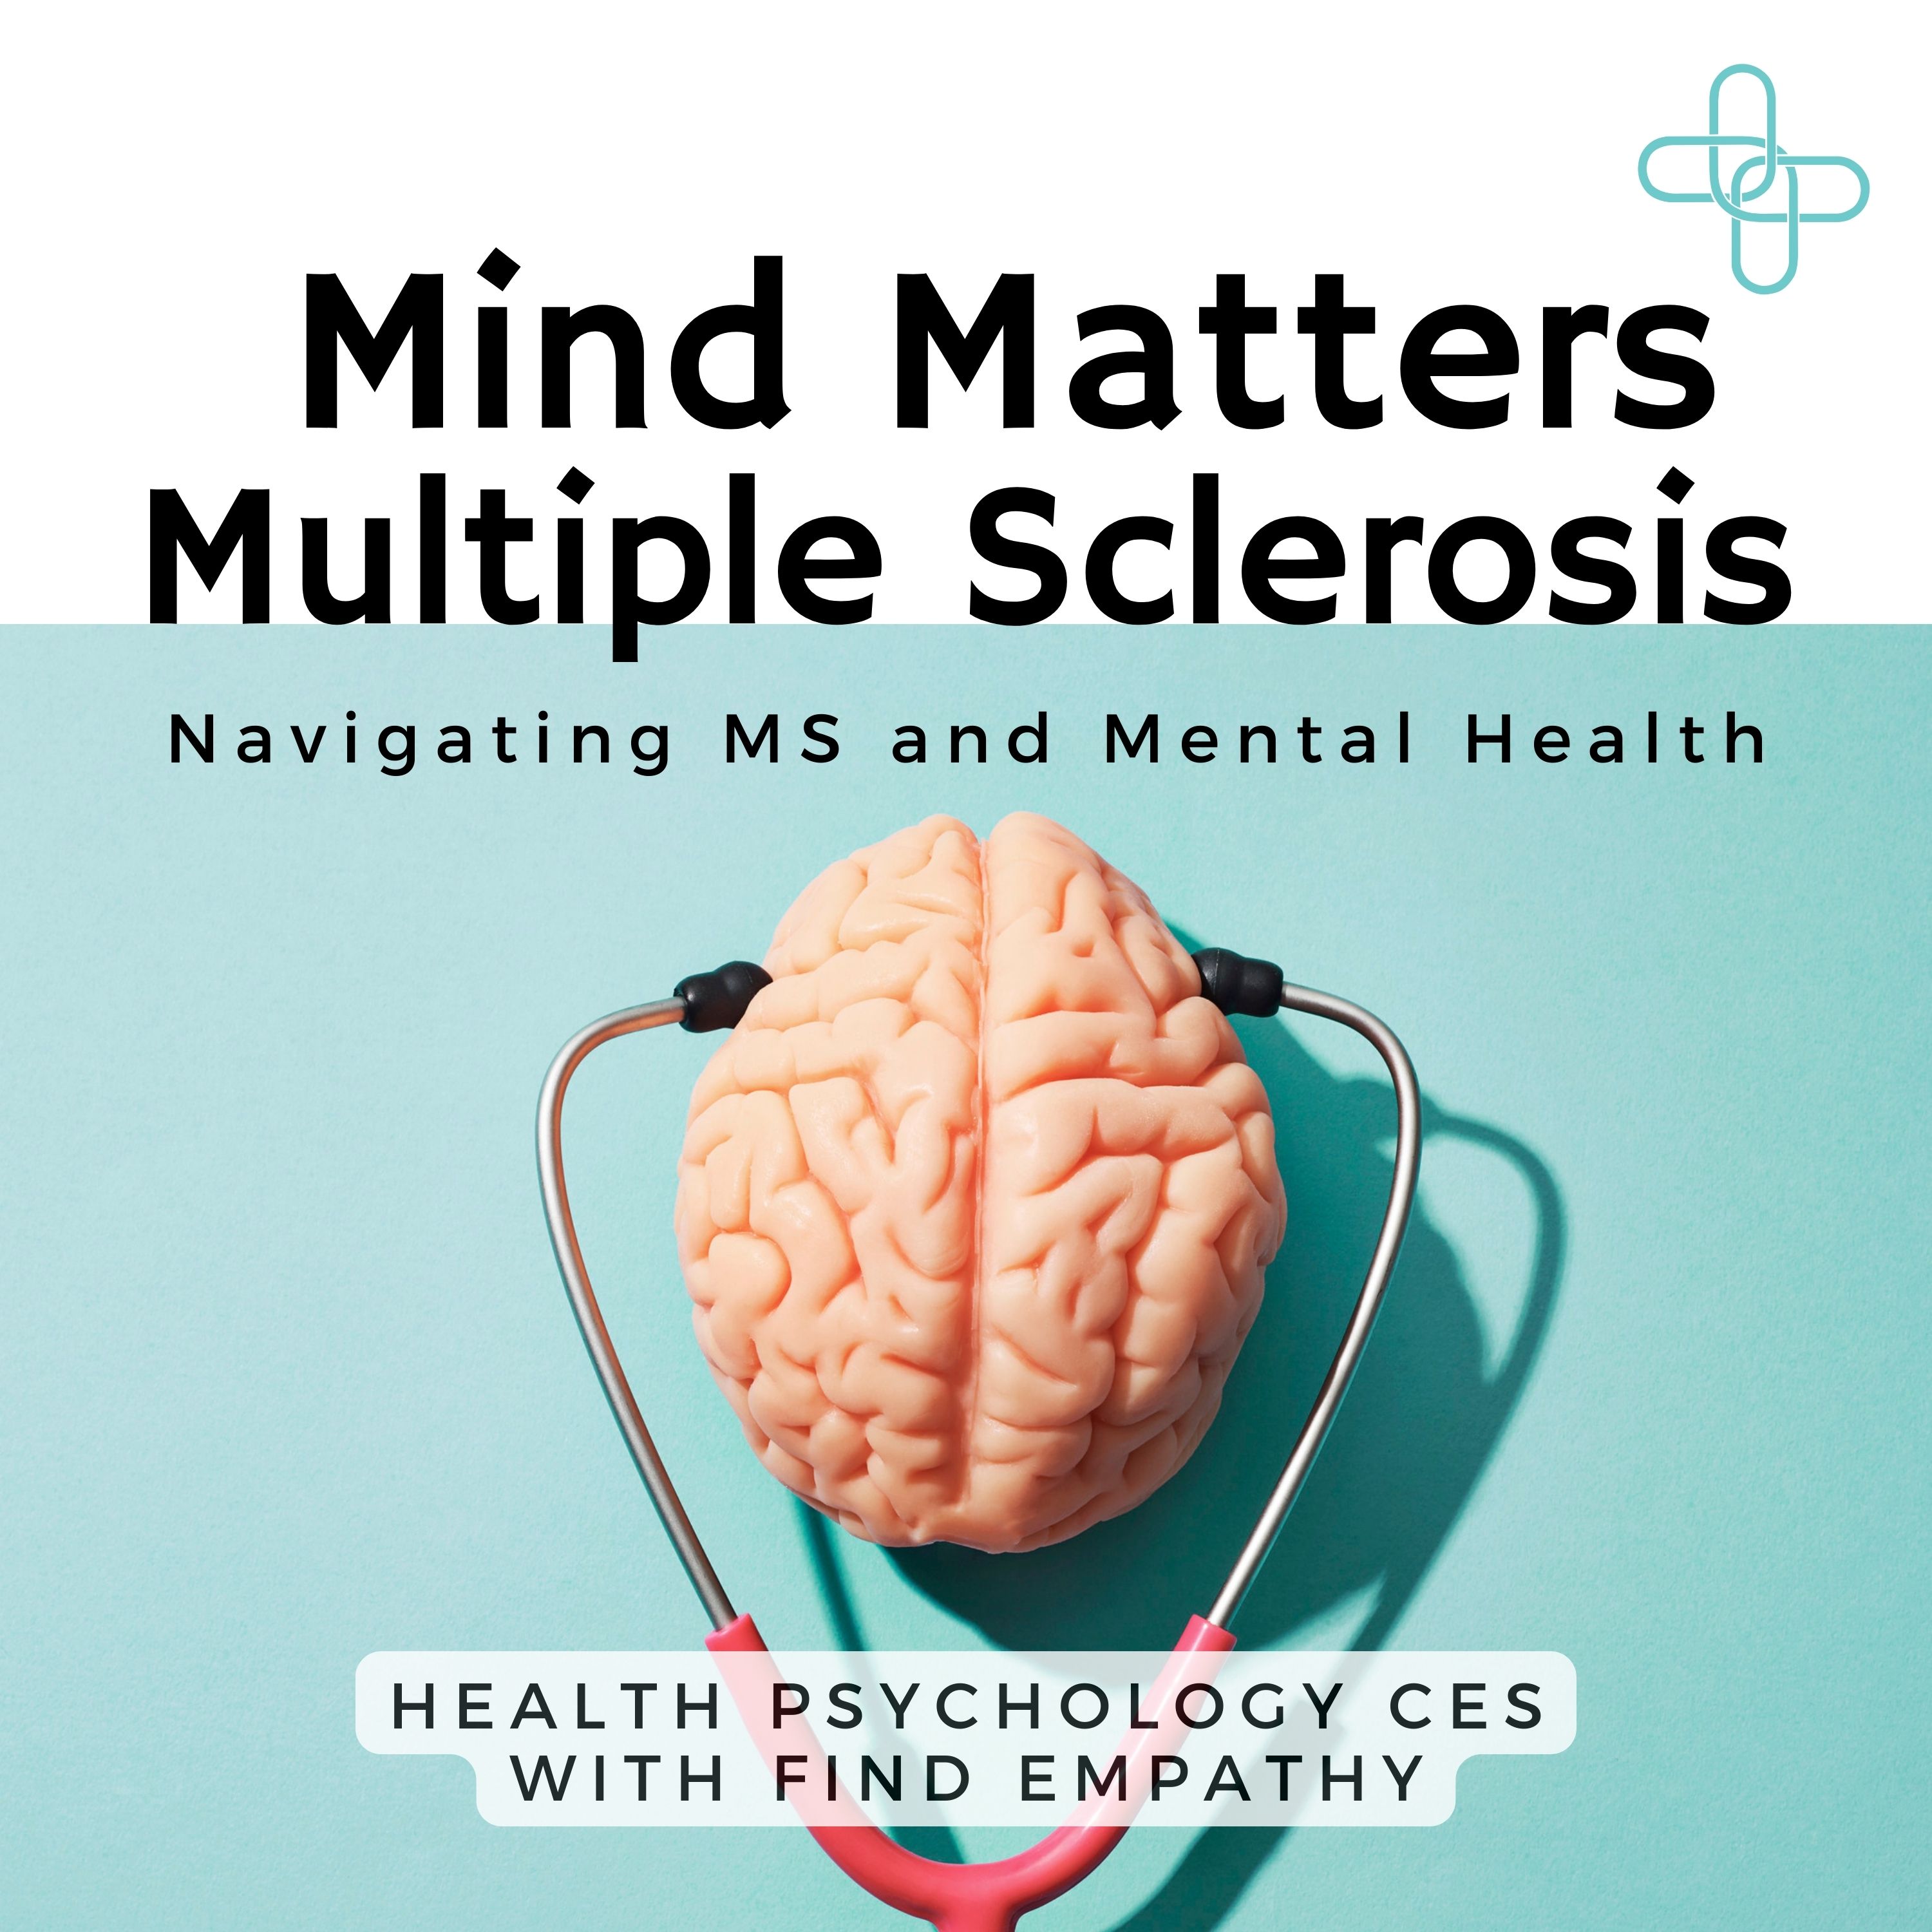 Multiple Sclerosis: Not Just a White Woman's Disease